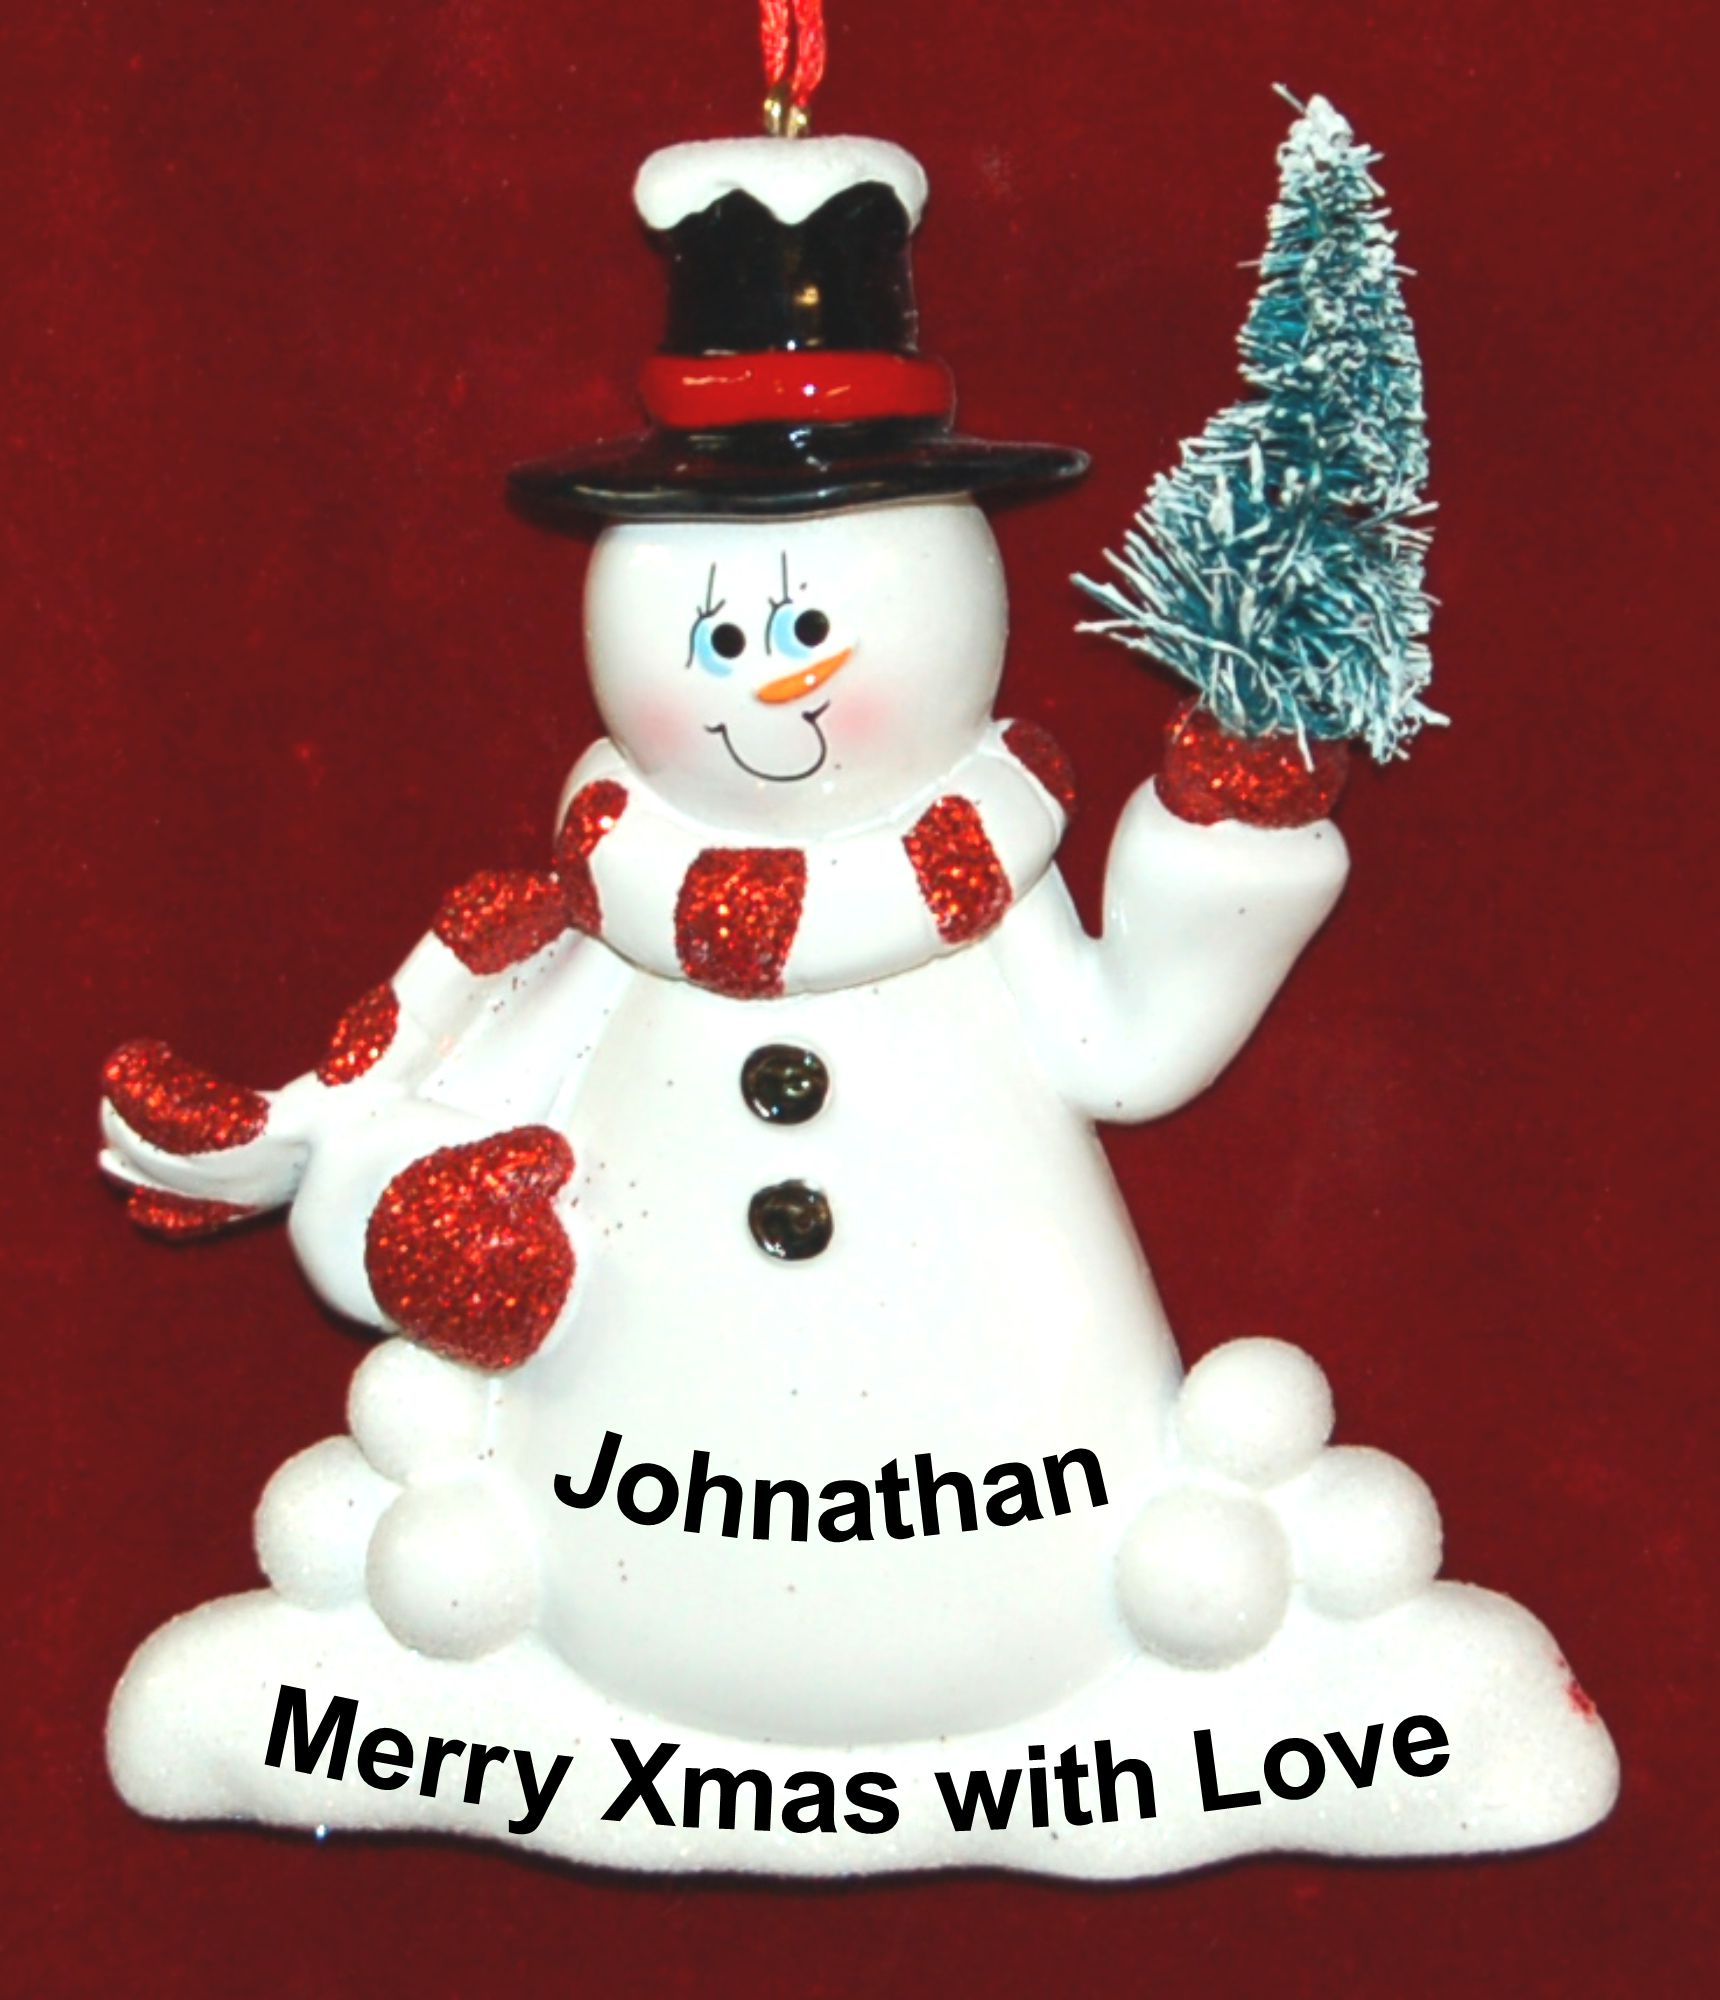 Snowman Christmas Ornament Winter Fun Personalized by RussellRhodes.com